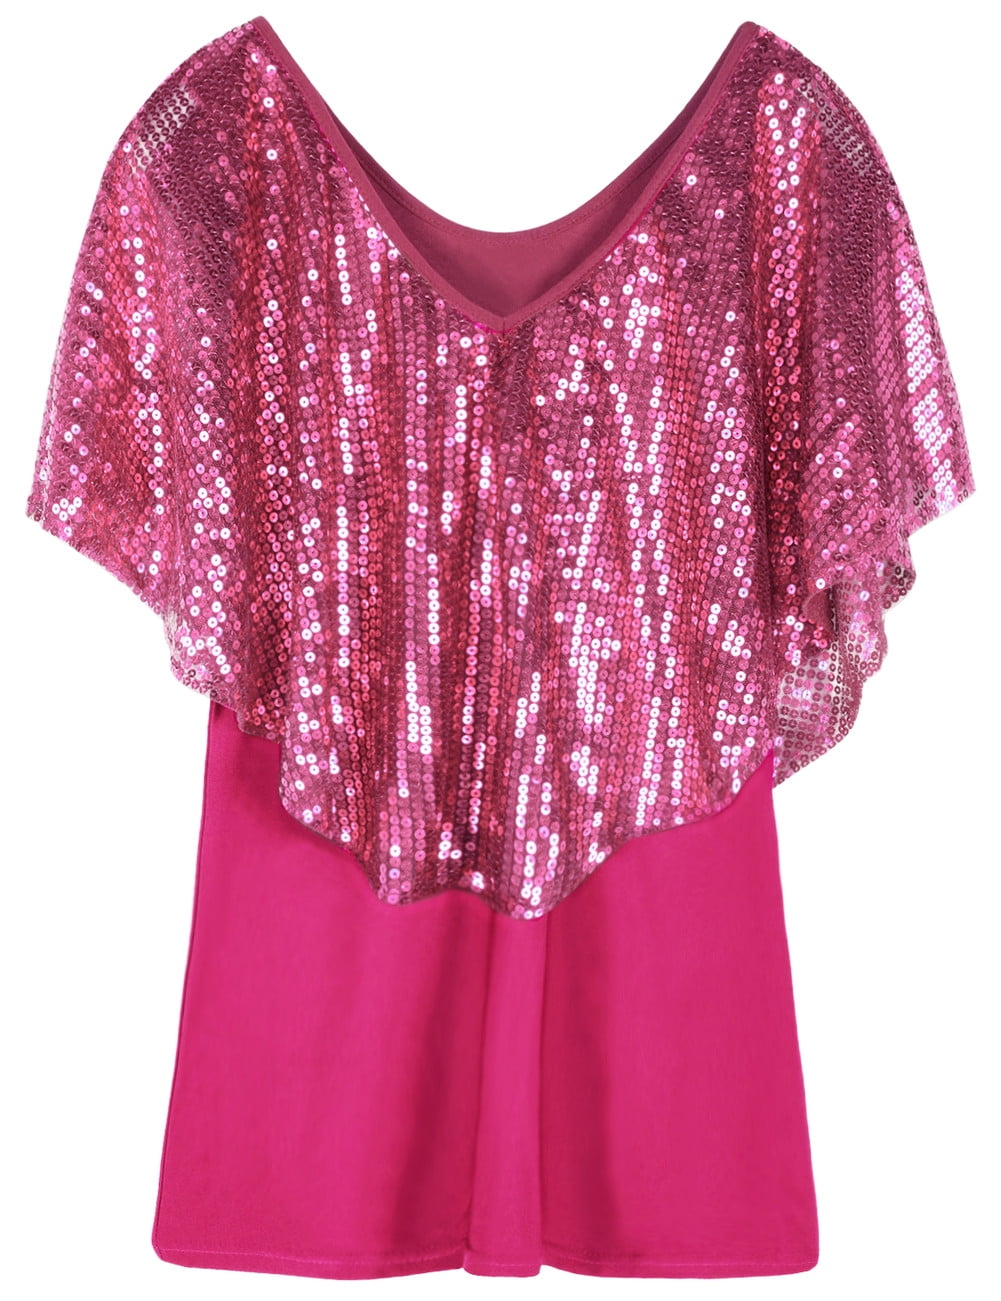 GIRLS PINK SPARKLY SEQUIN BUTTERFLY LOGO PARTY SOFT KNIT JUMPER TUNIC DRESS TOP 